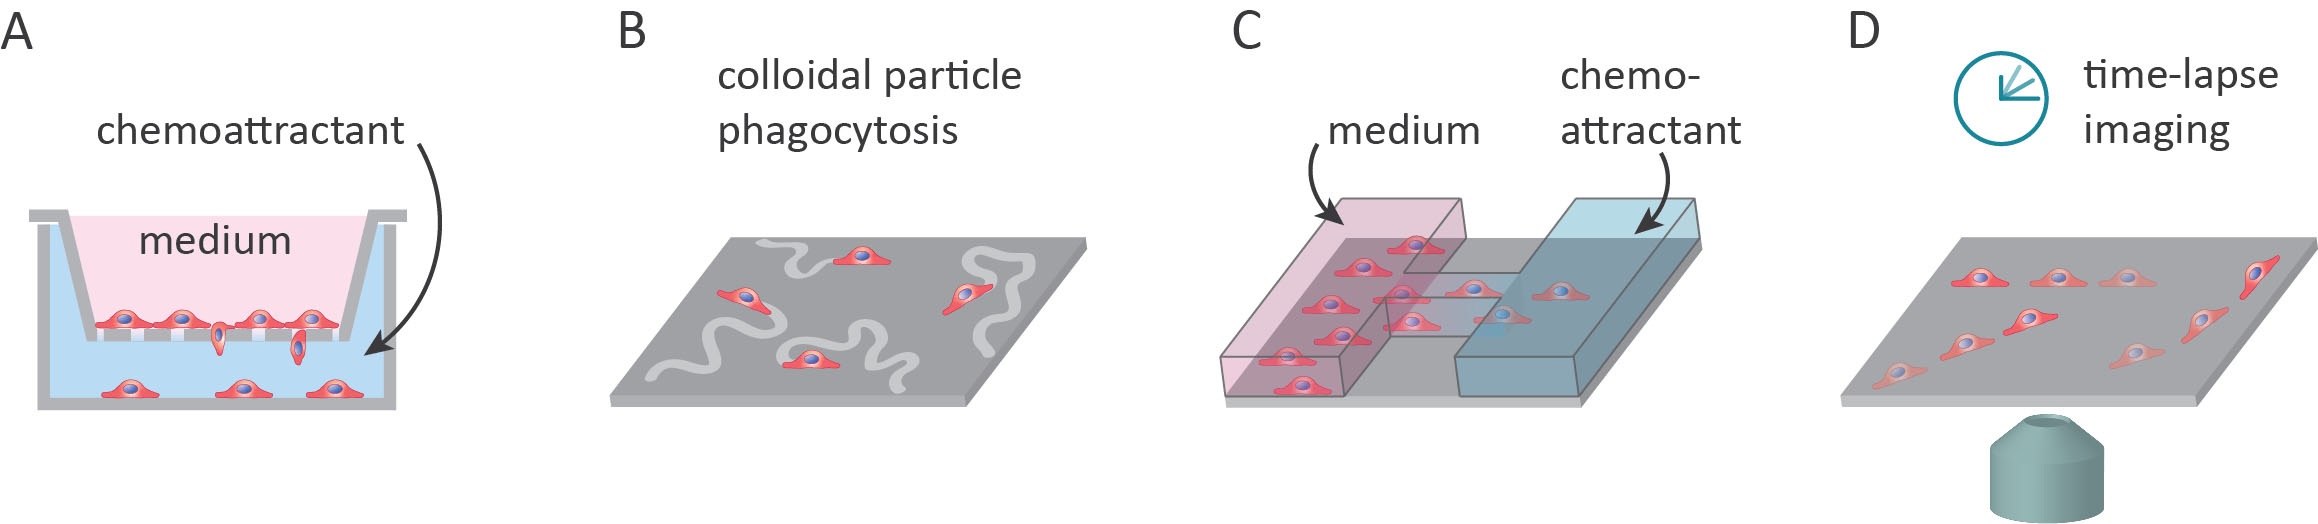 Single-cell migration assays